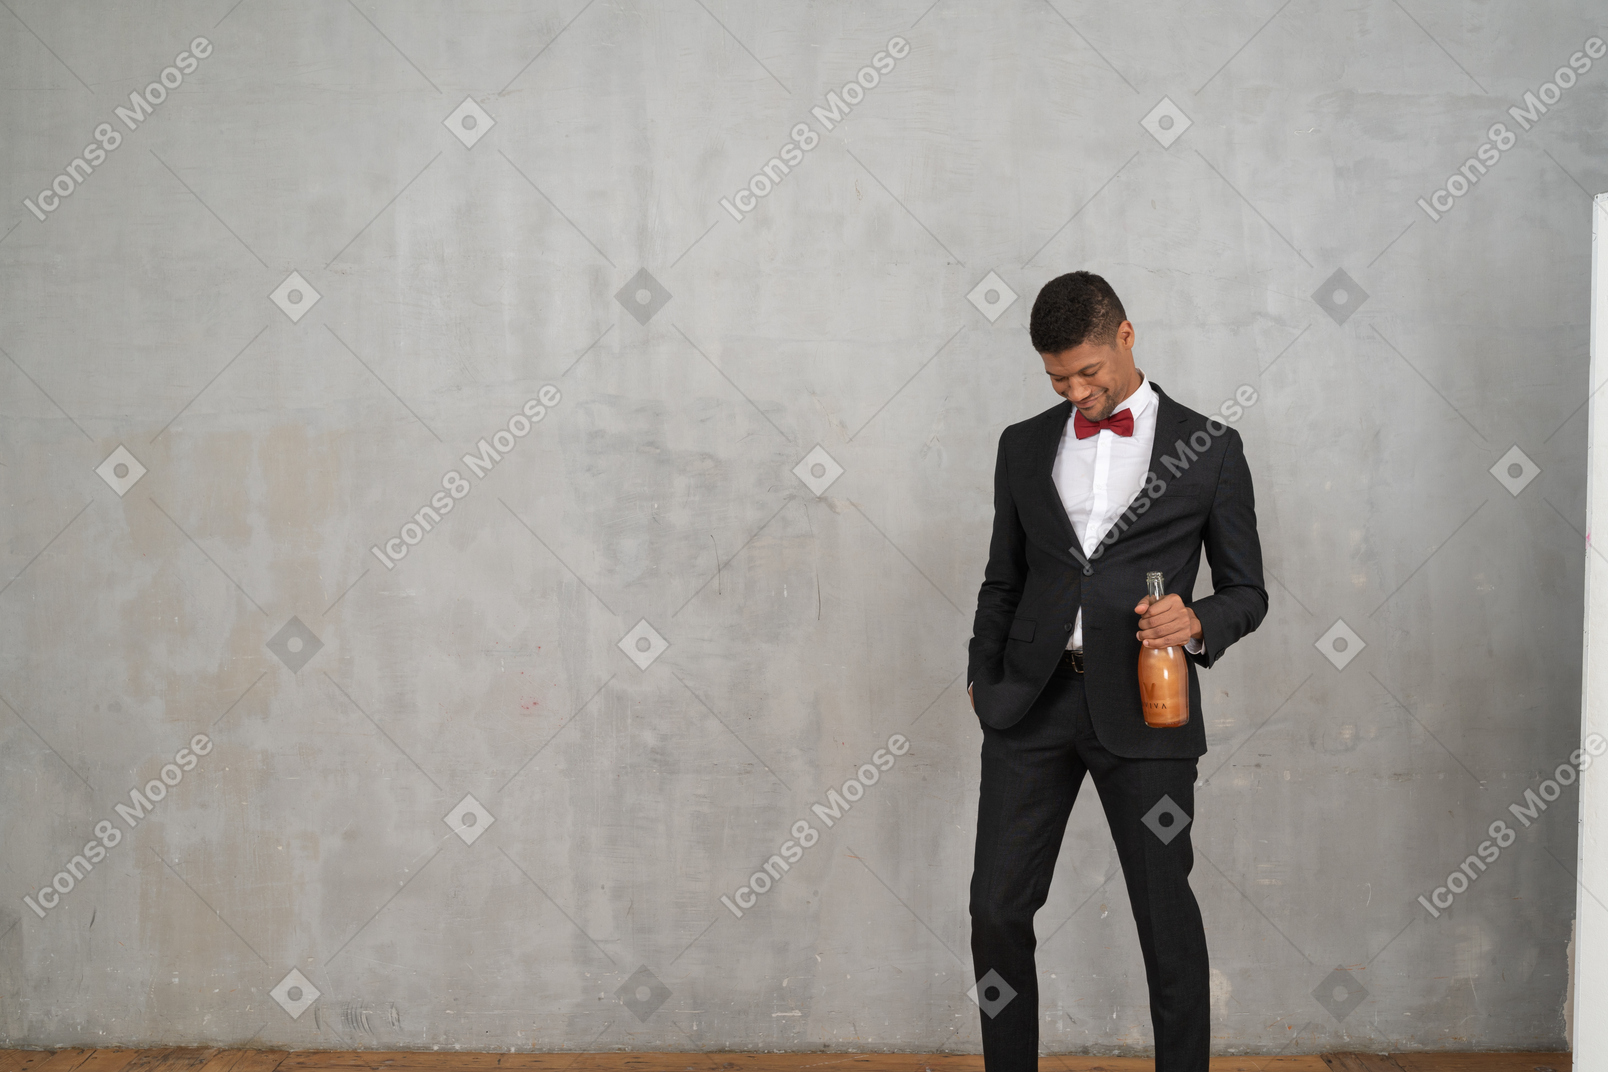 Smiling man with a bottle of champagne looking down